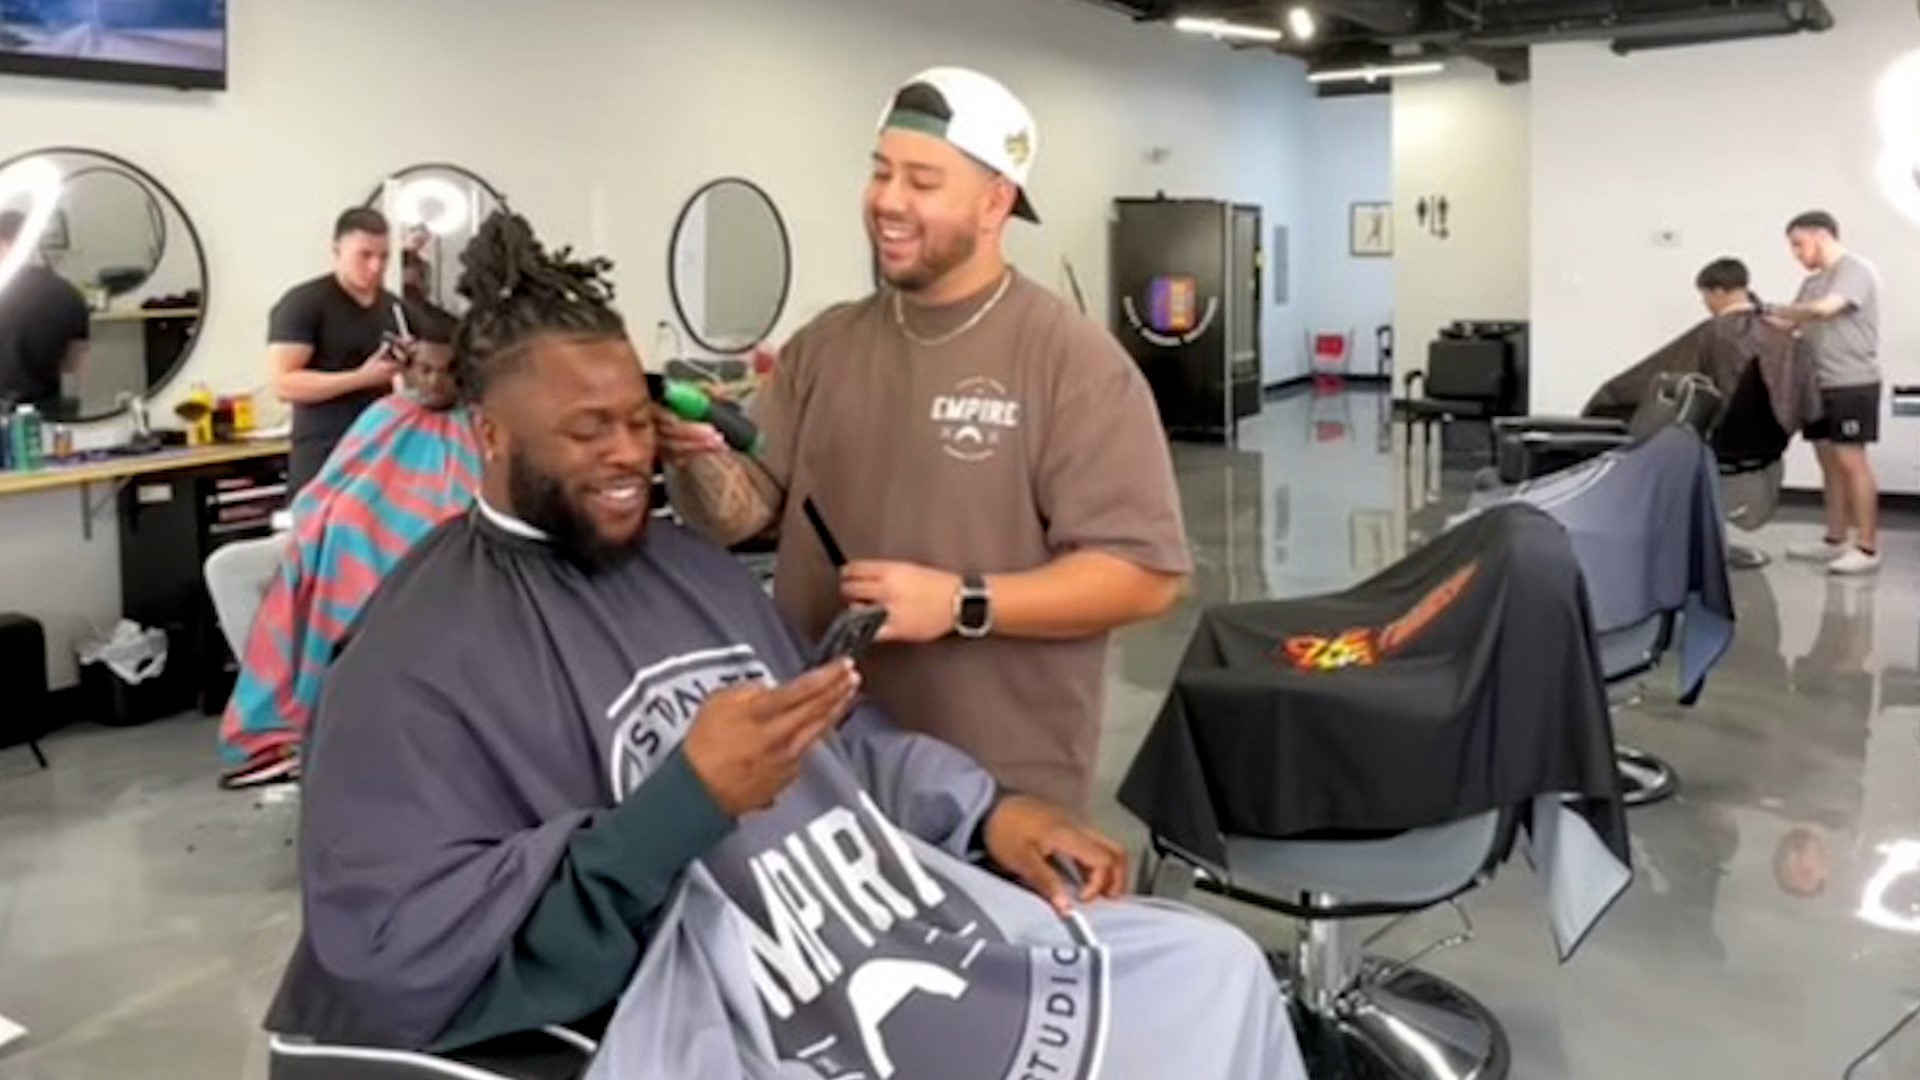 Julian Diaz, AKA "J.D.," has cut the hair of many athletes and celebs who have become great friends.